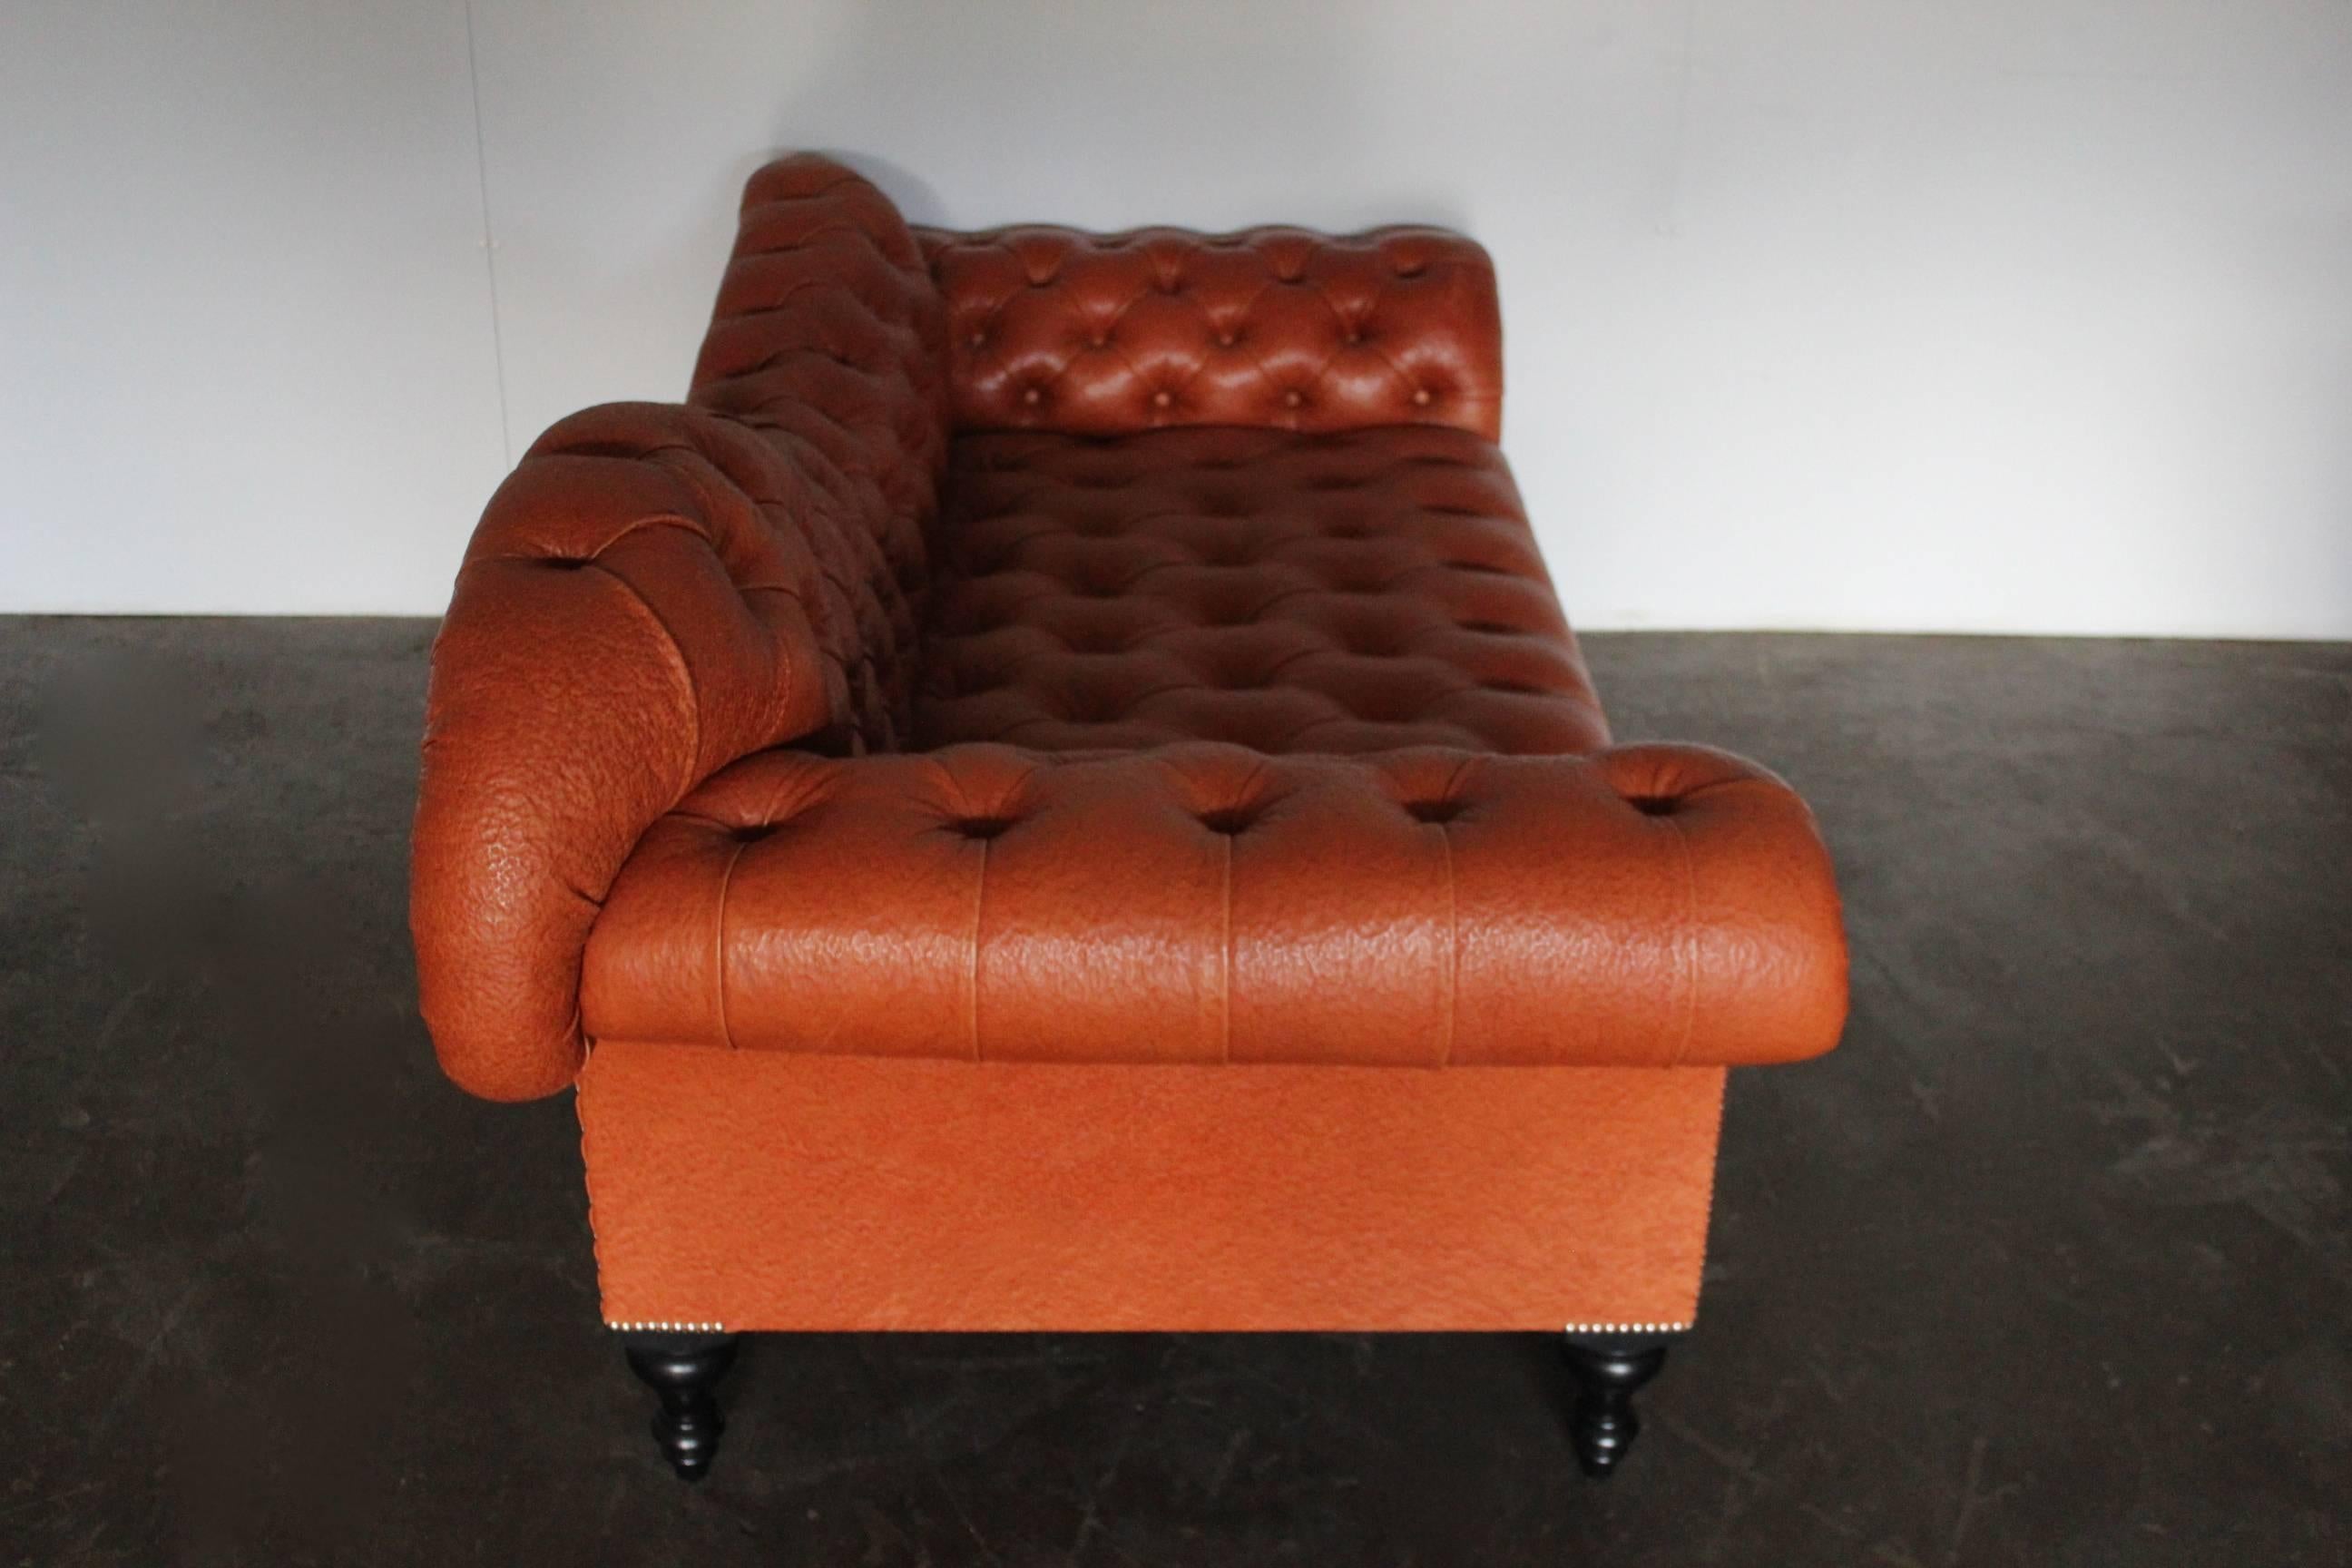 American Classical George Smith “Dog-Kennel Bed” Sofa/Chaise in Special-Order Tan-Brown Leather